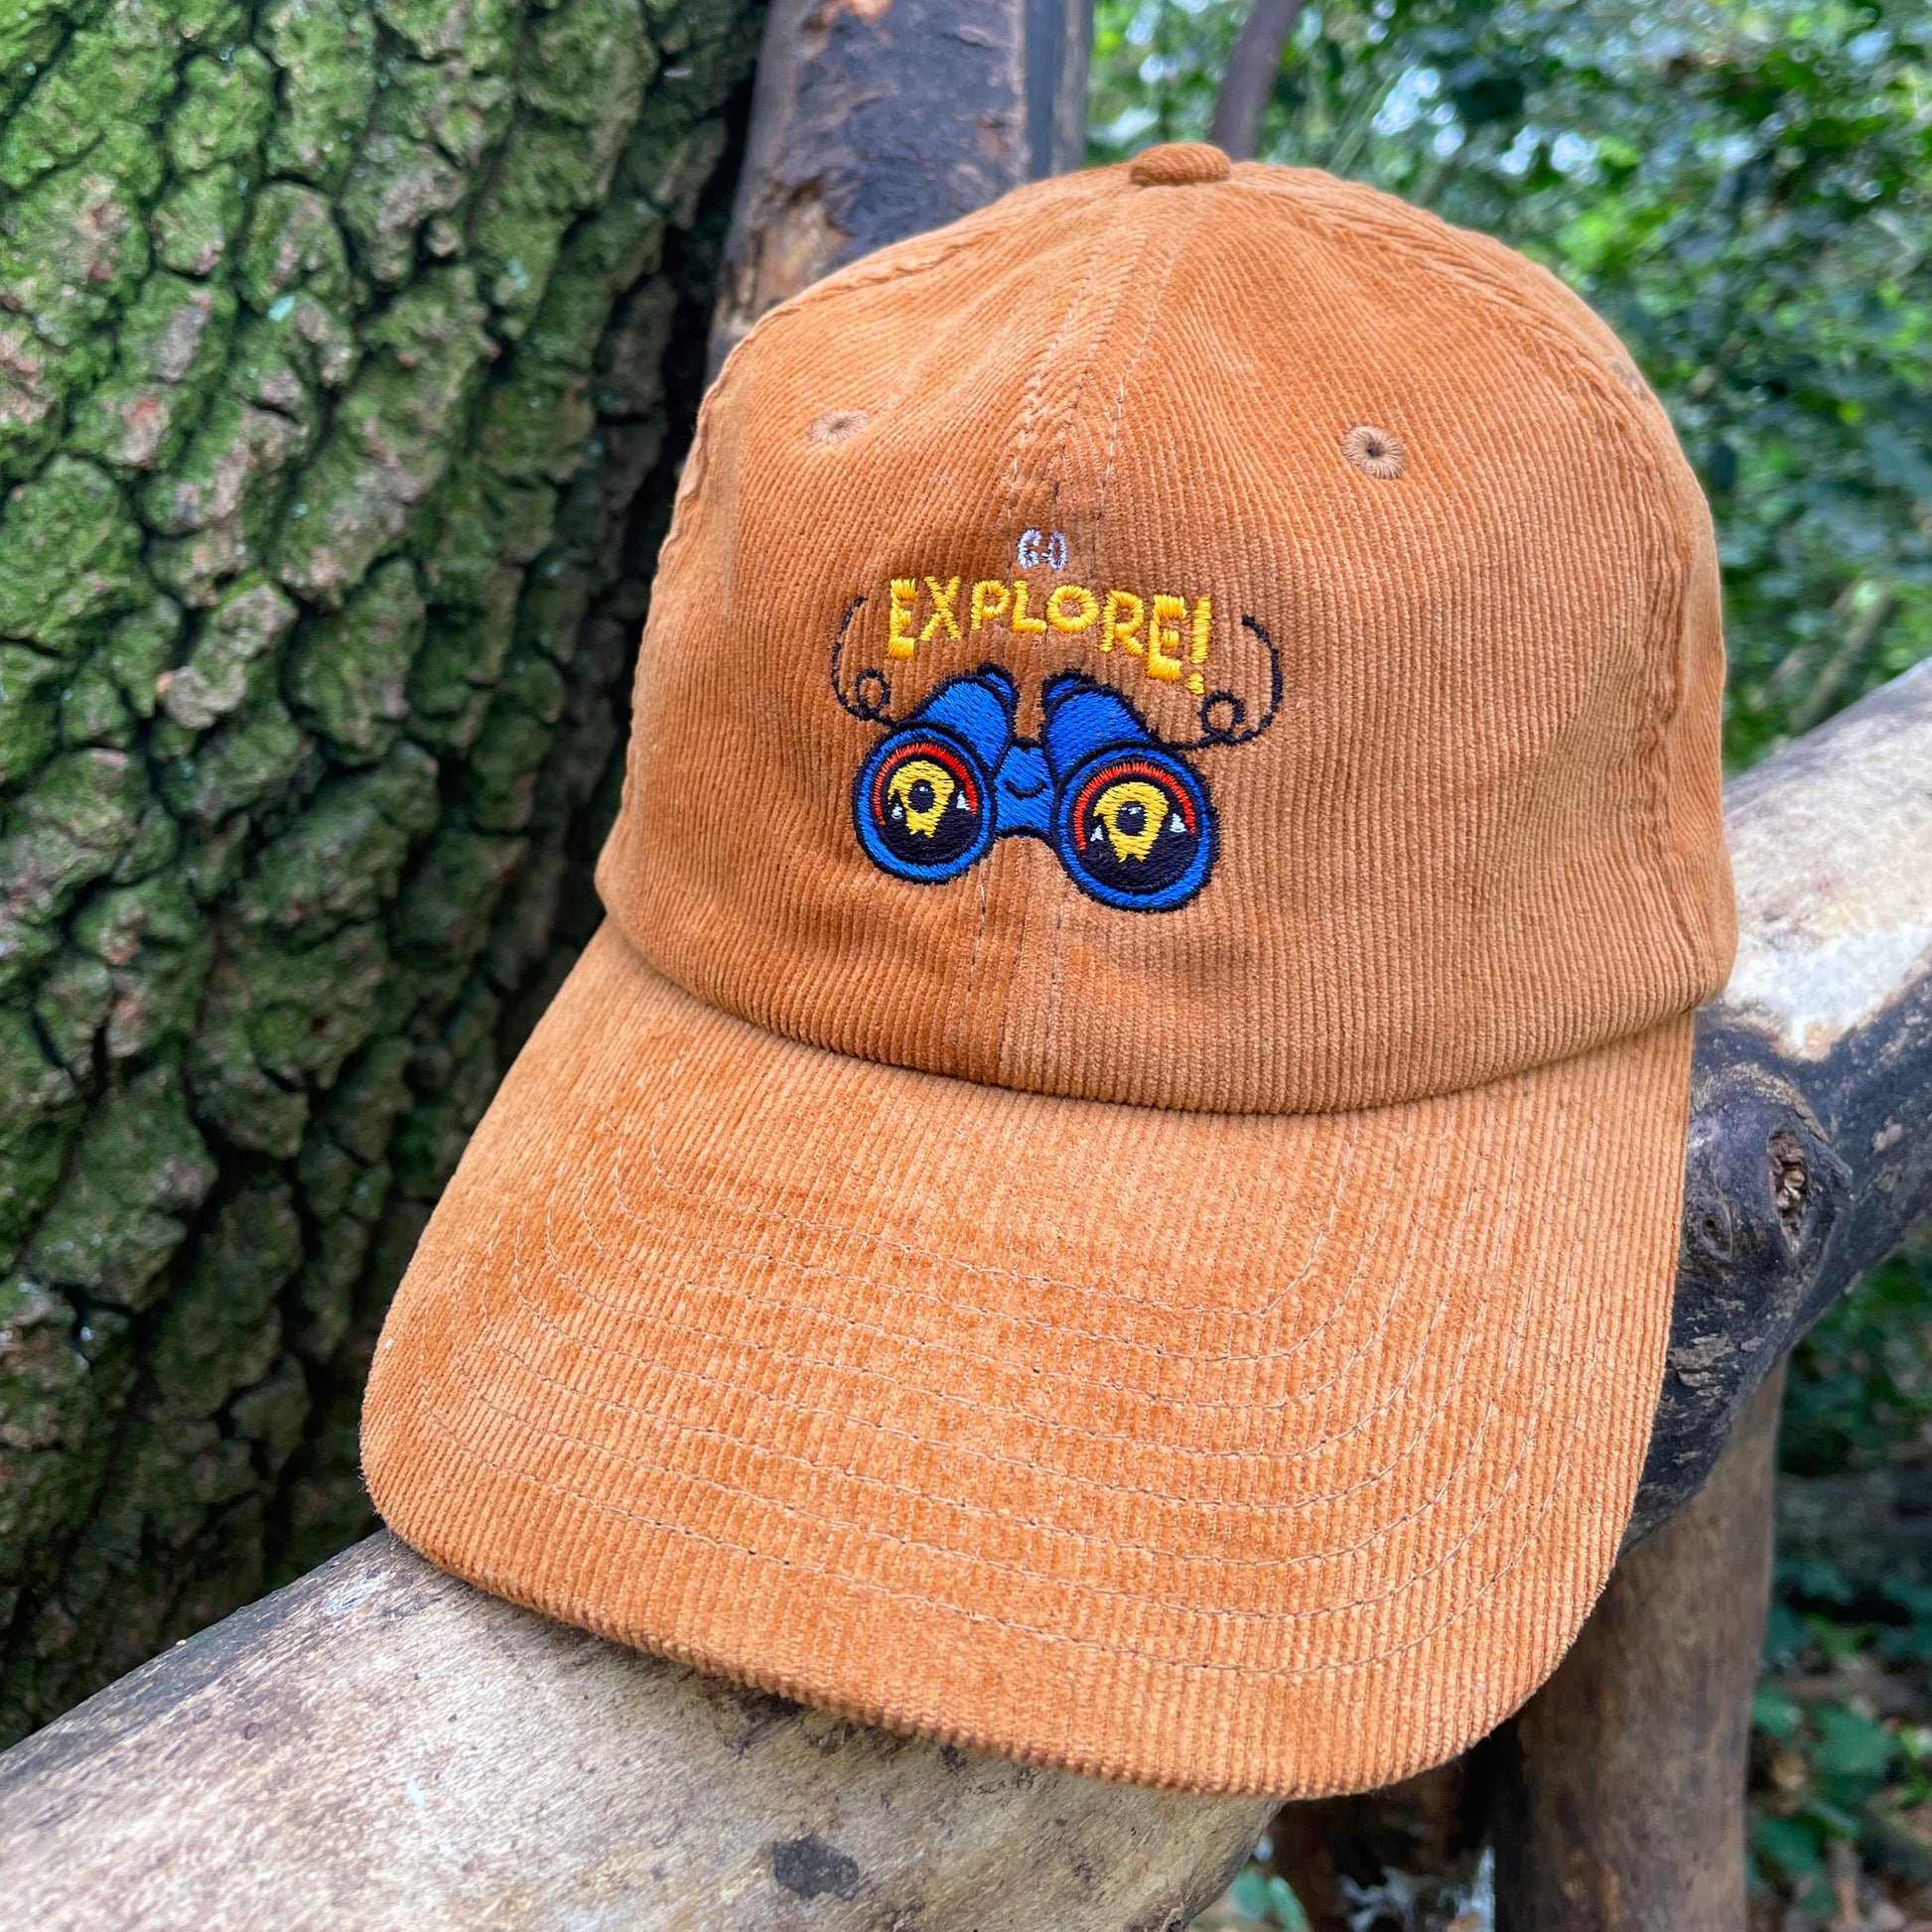 Go Explore! Cute Embroidered Cap-Geeky Little Monkey